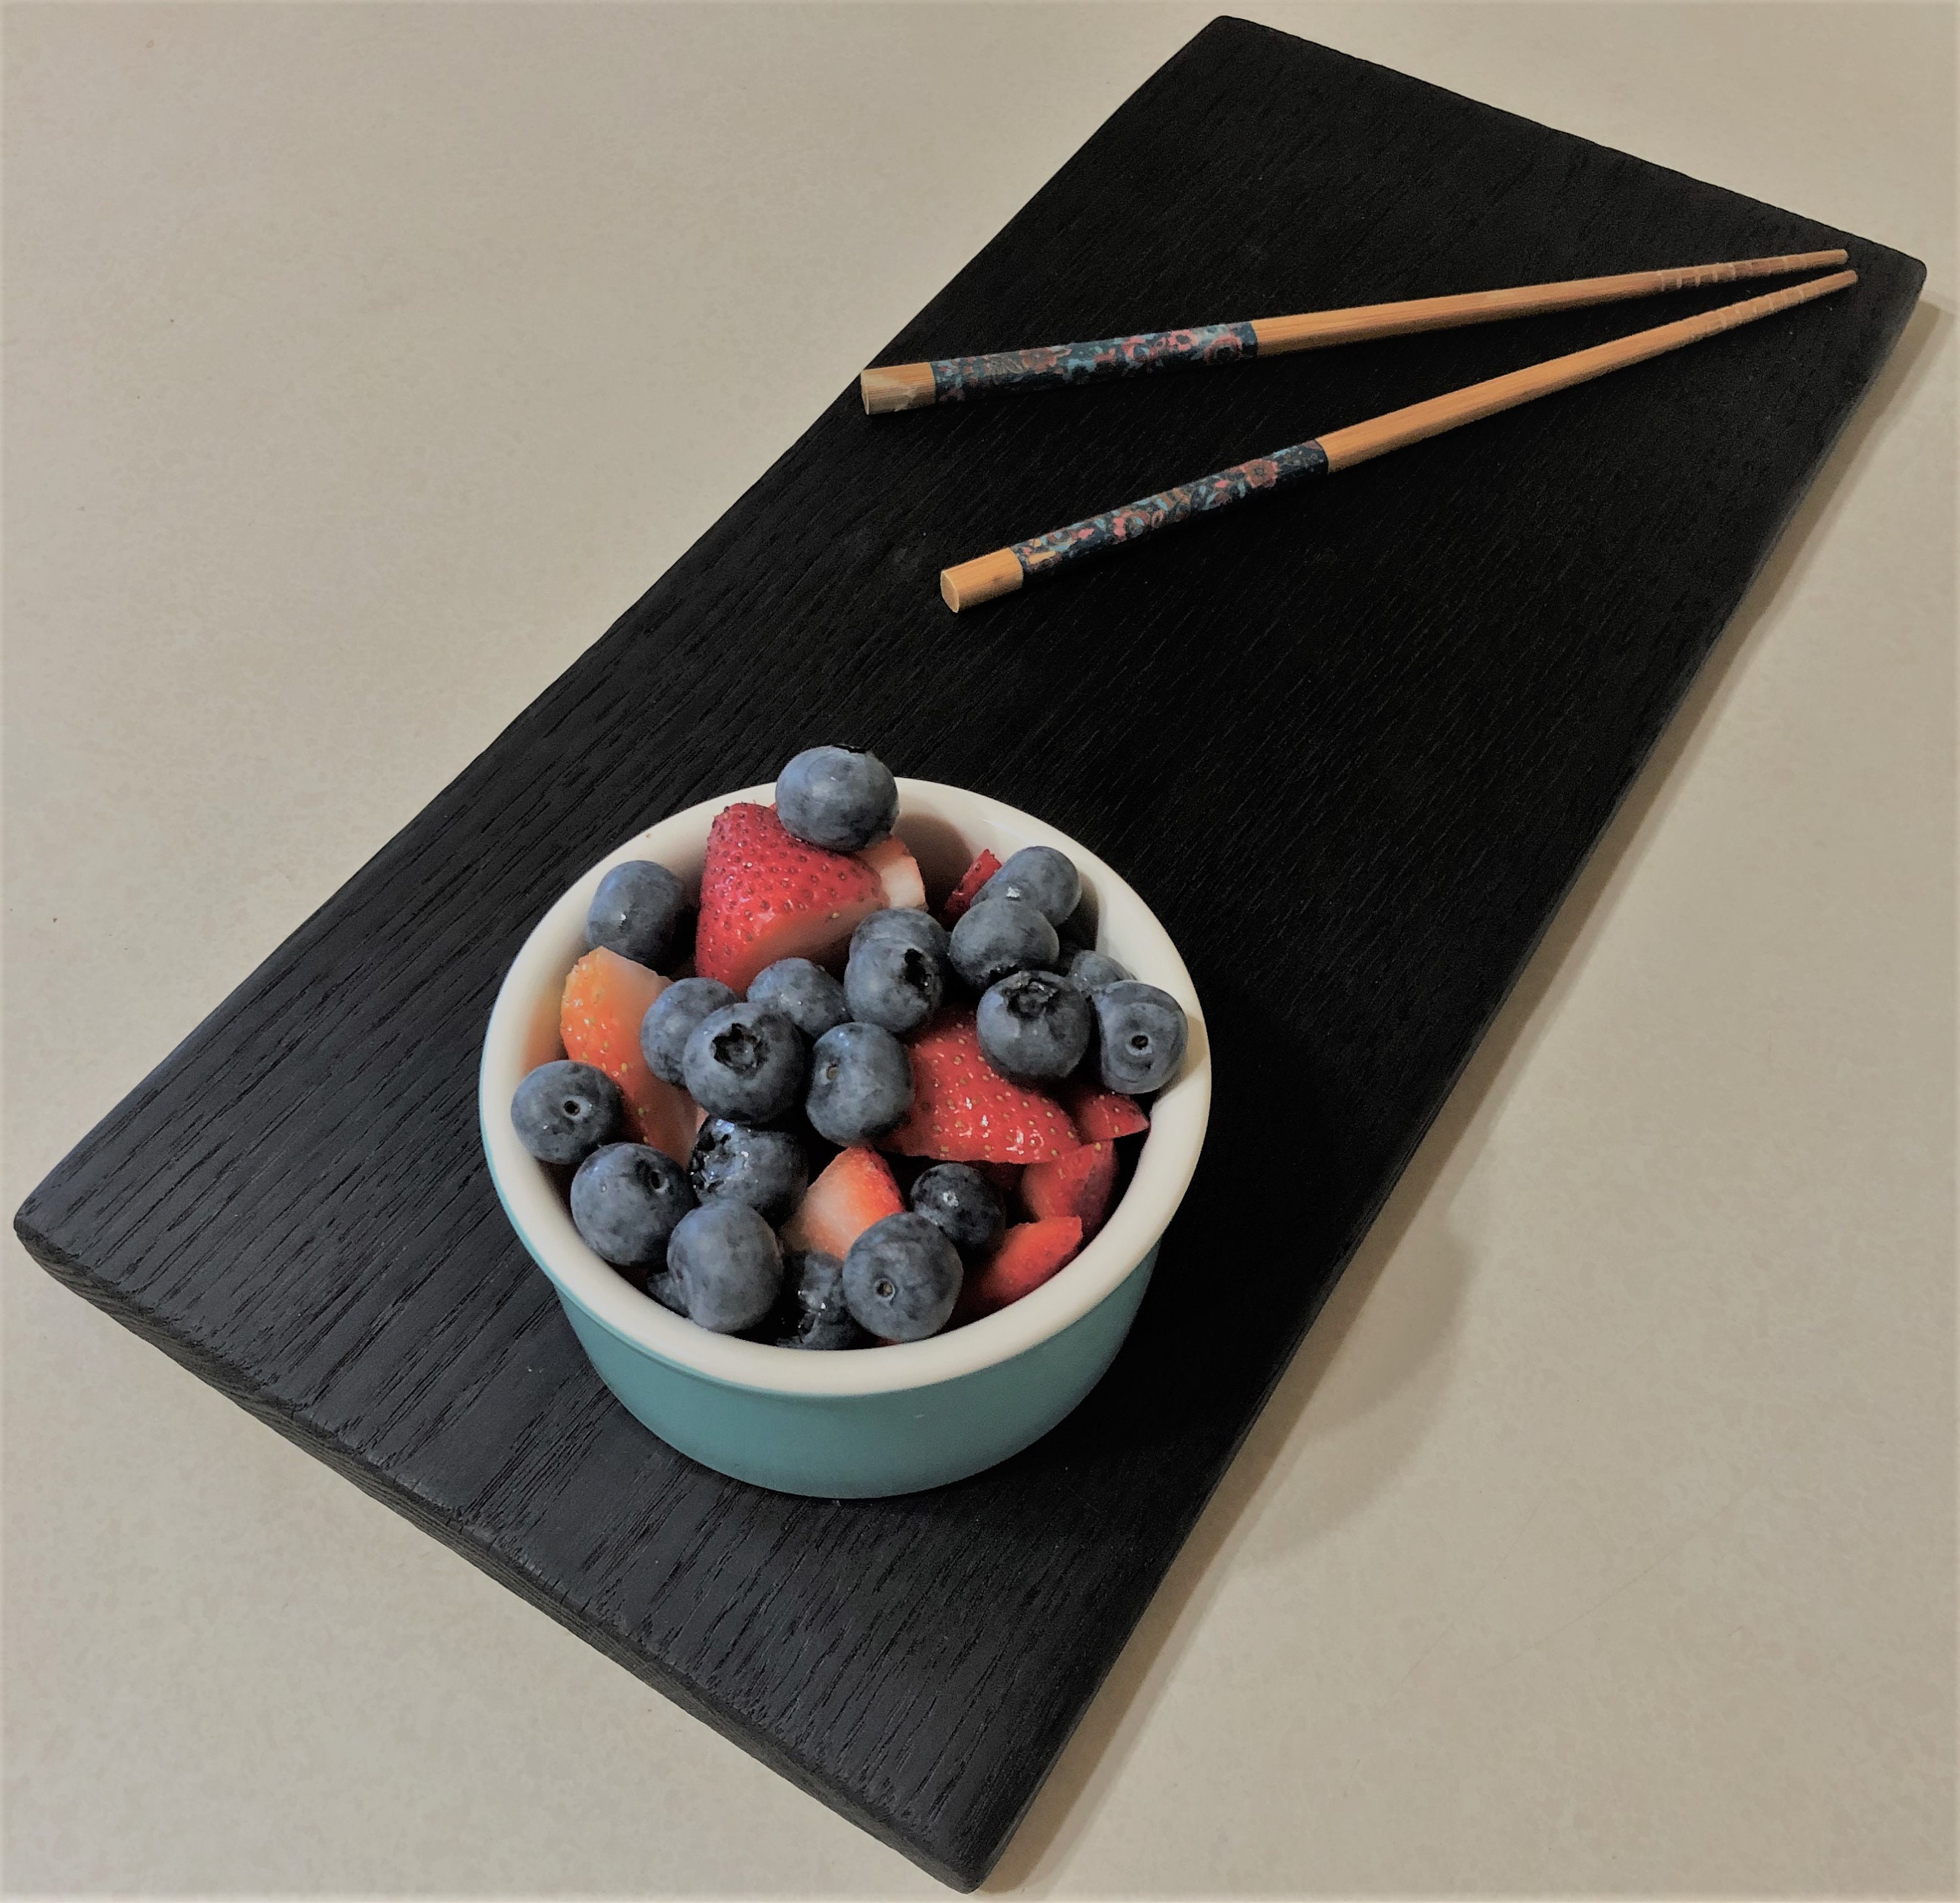 Sushi or Charcuterie serving board (Made-to-Order) – Angry Nimbus Woodcraft